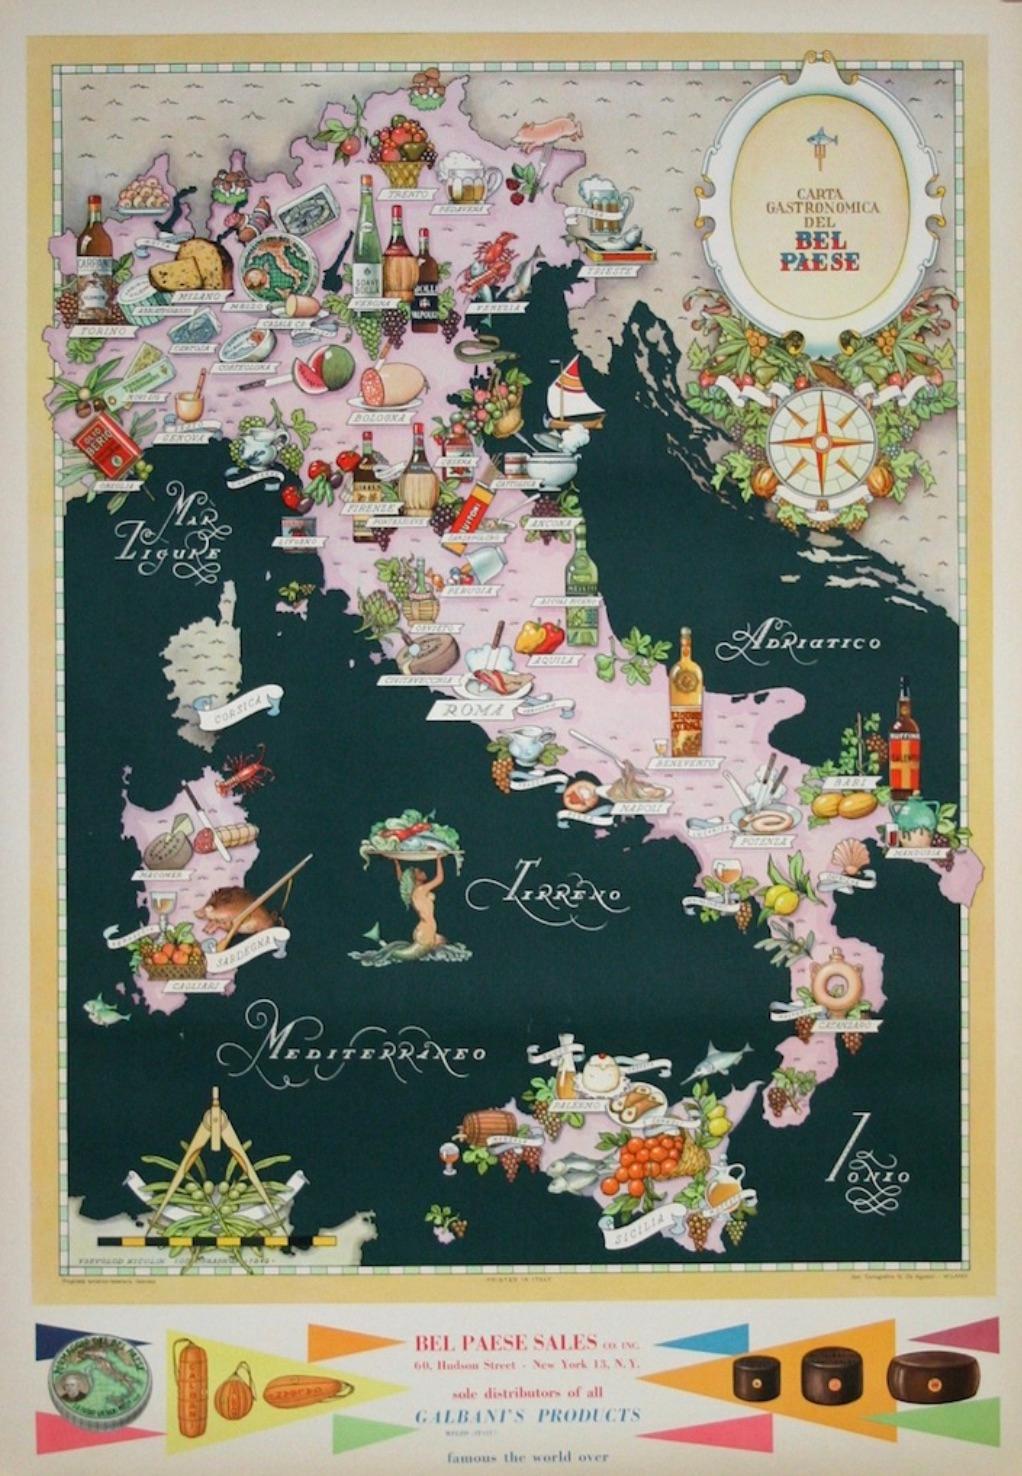 Artist: Vsevolad Nicouline  (Italian 1890-1968)

Date of Origin: 1949

Medium: Original Stone Lithograph Vintage Poster

Size: 27” x 39”

 

Italian gastronomic map for the Bel Paese Cheese company showing all the local gastronomic products. Printed